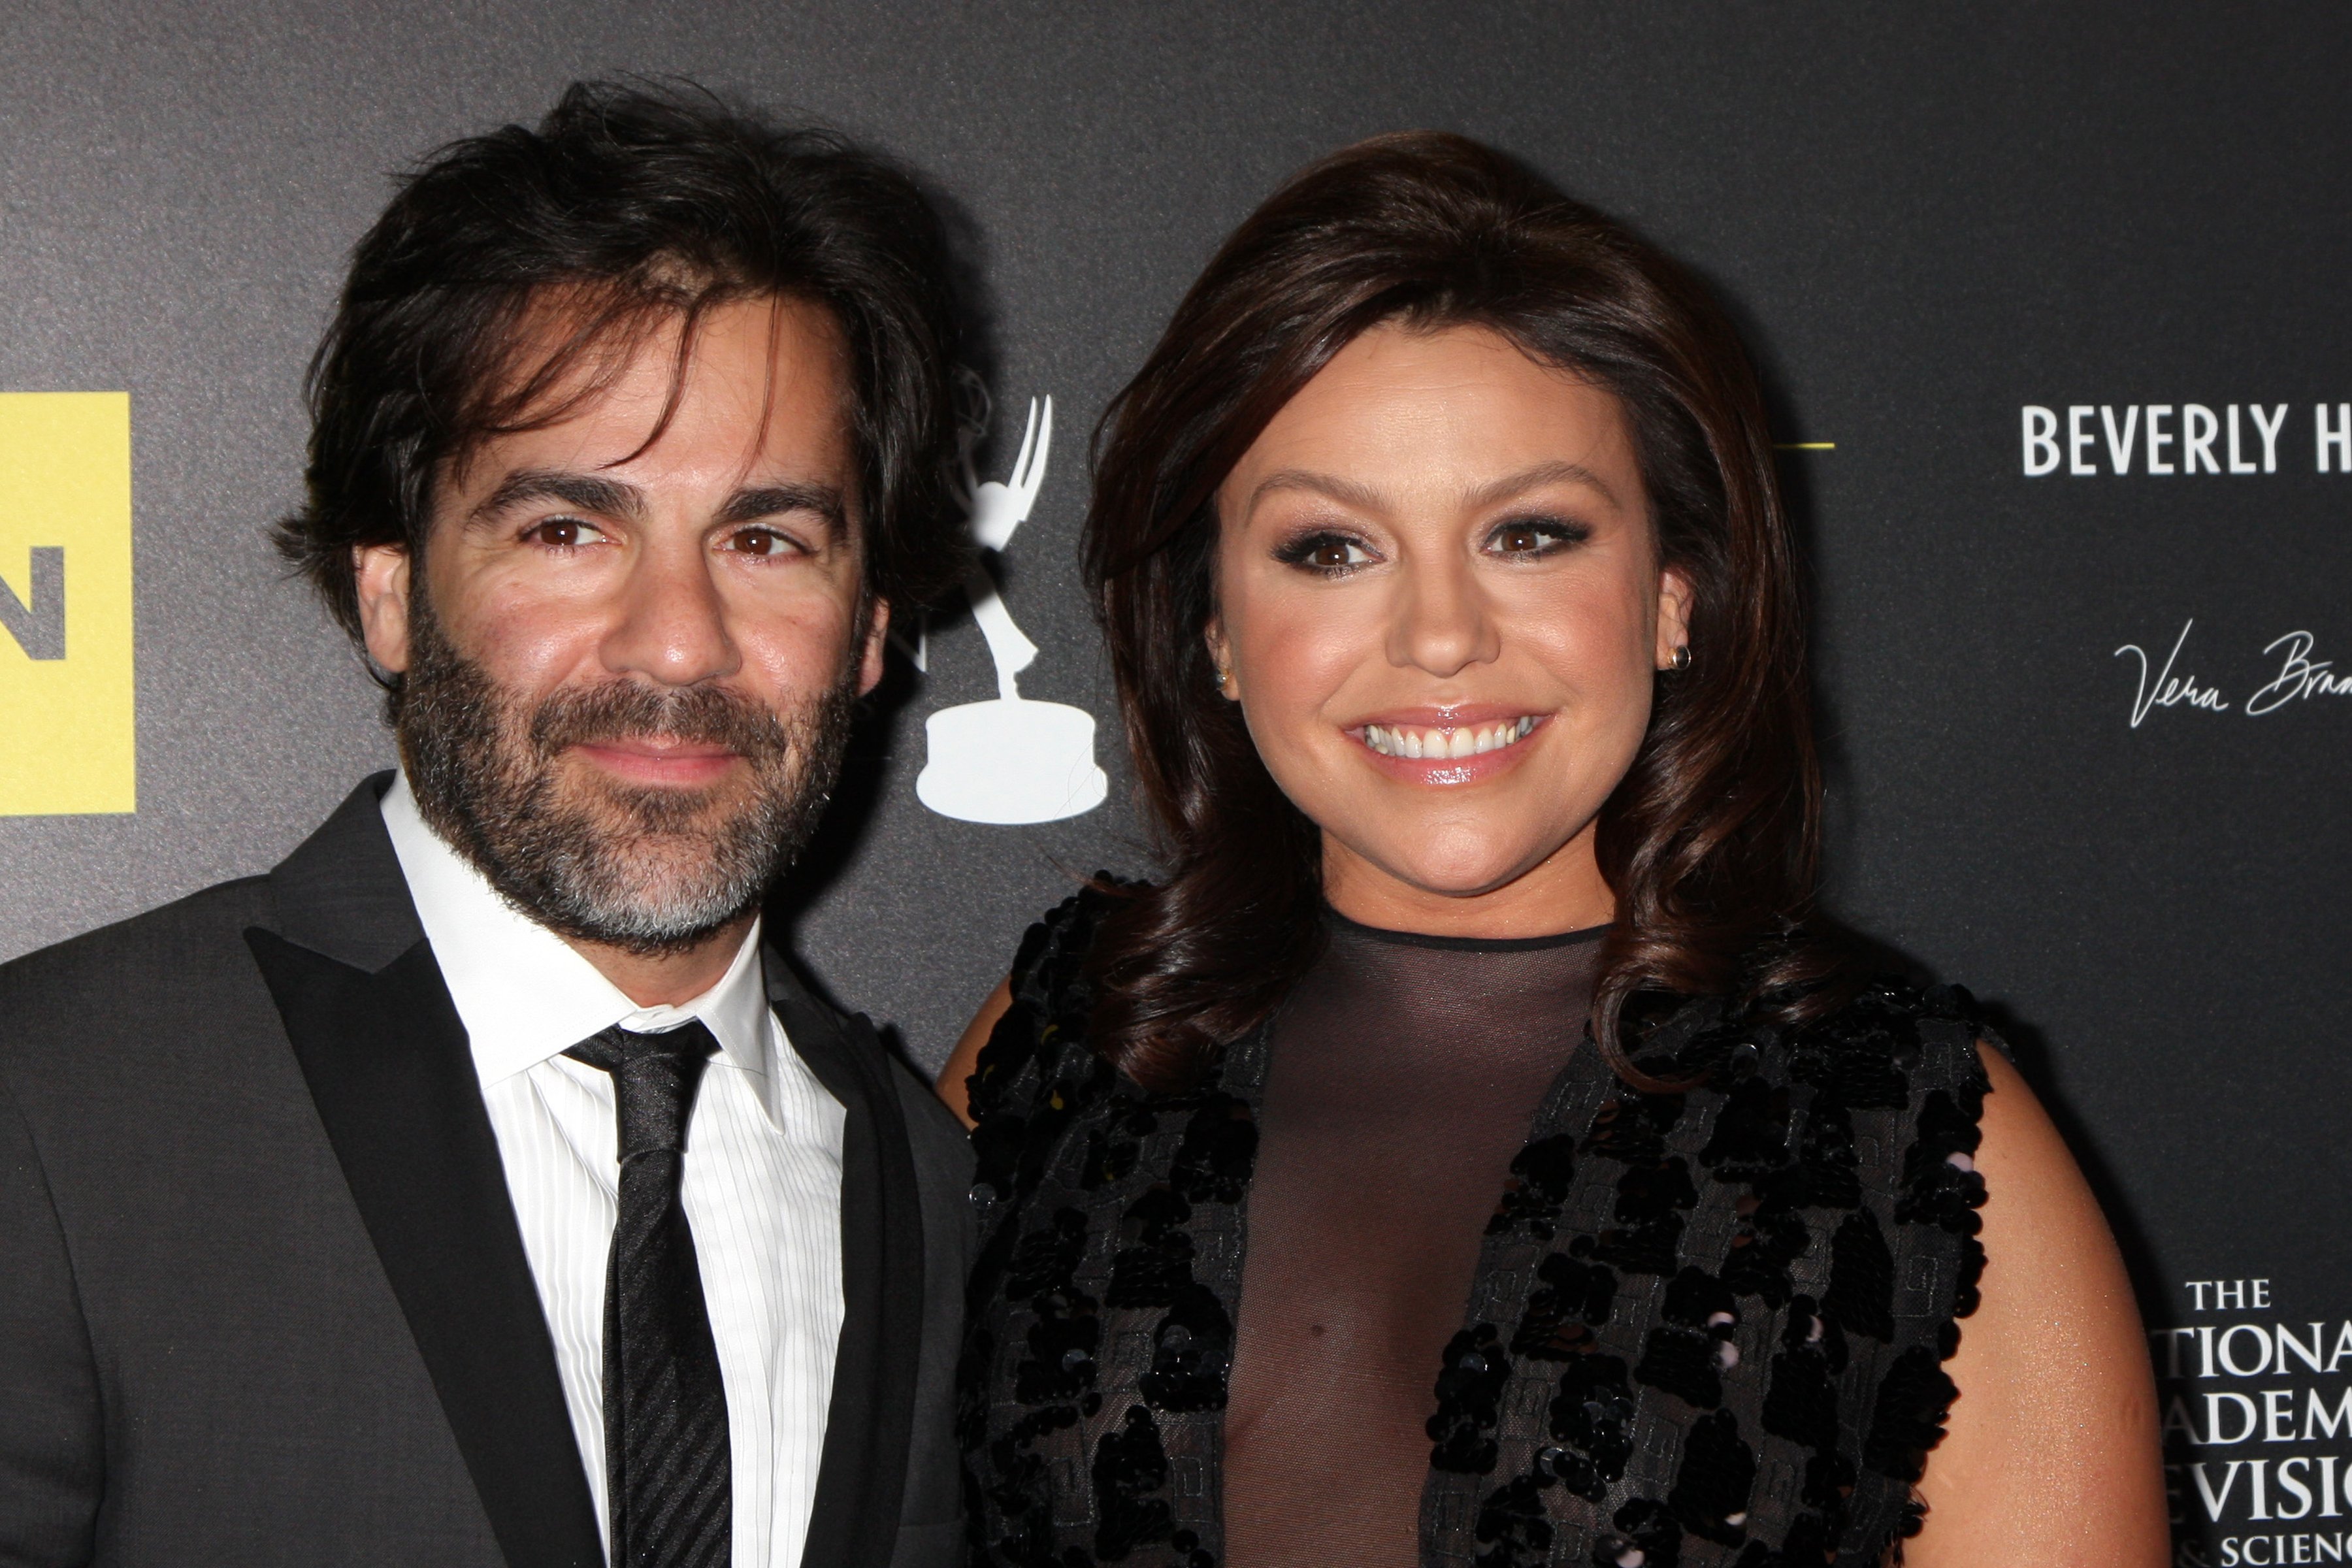 Rachael Ray and husband, John Cusimano at the Daytime Emmy Awards hosted in Beverly Hills, California in 2012. | Photo: Shutterstock